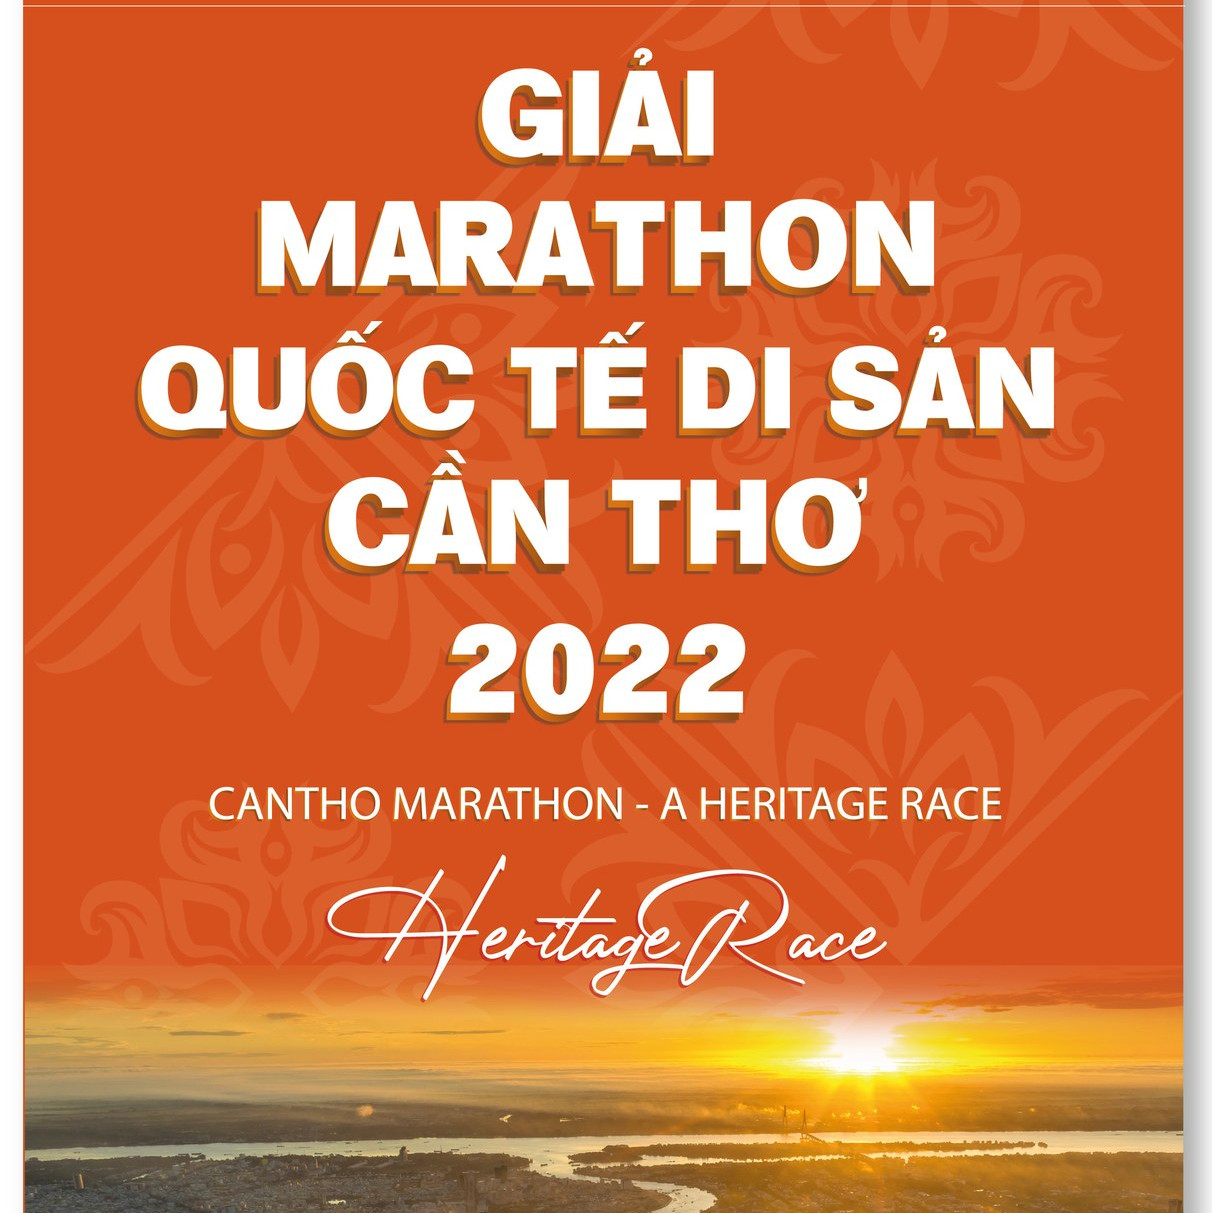 California Fitness & Yoga Joins Can Tho Marathon - A Heritage Race 2022